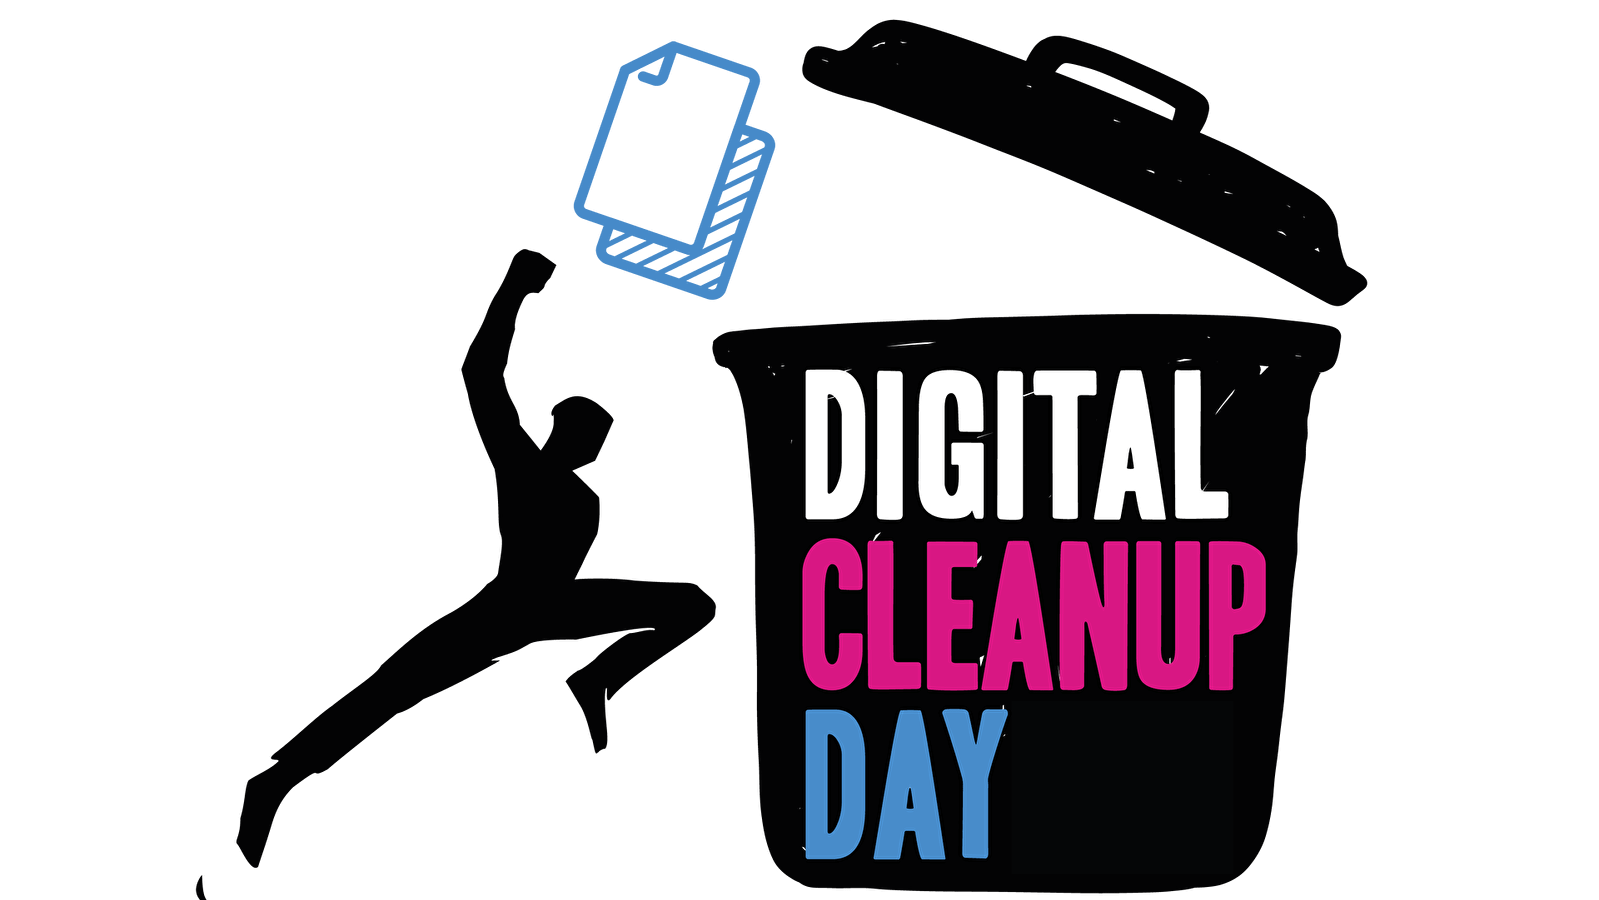 Nettoyer son smartphone et sa tablette - Digital Cleanup Day